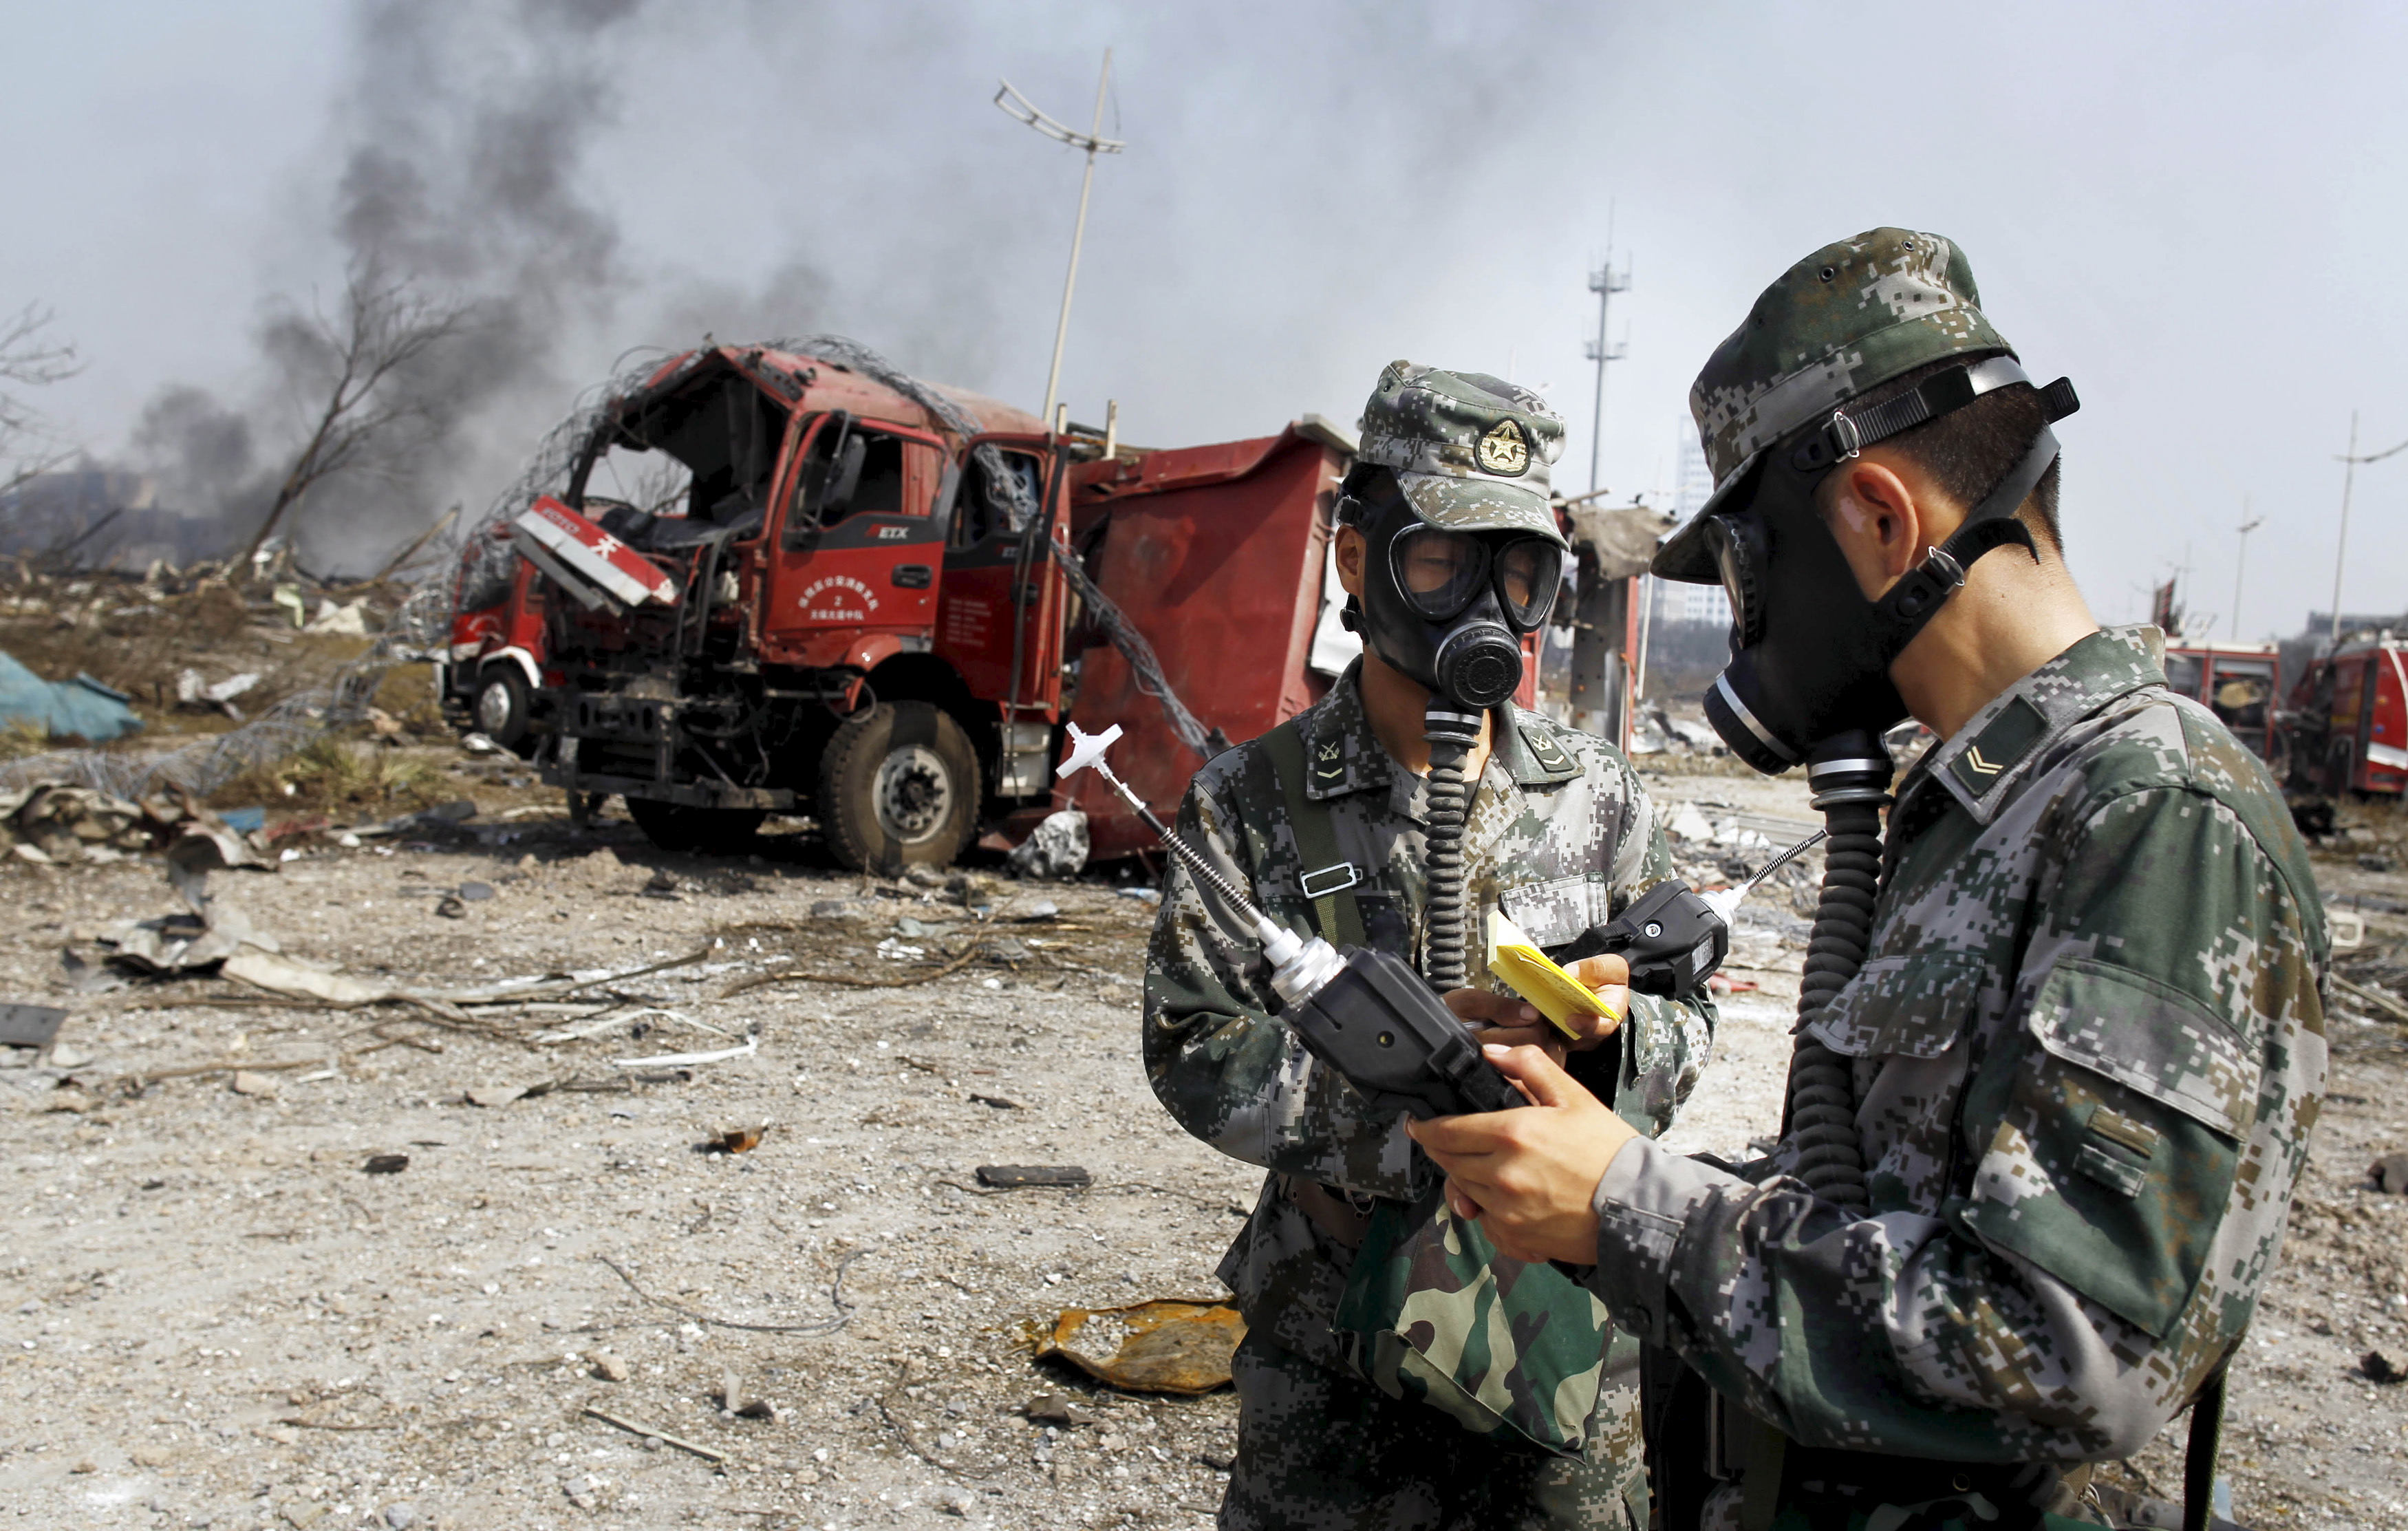 Soldiers of the People's Liberation Army anti-chemical warfare corps work next to a damaged firefighting vehicle at the site of Wednesday night's explosions at Binhai new district